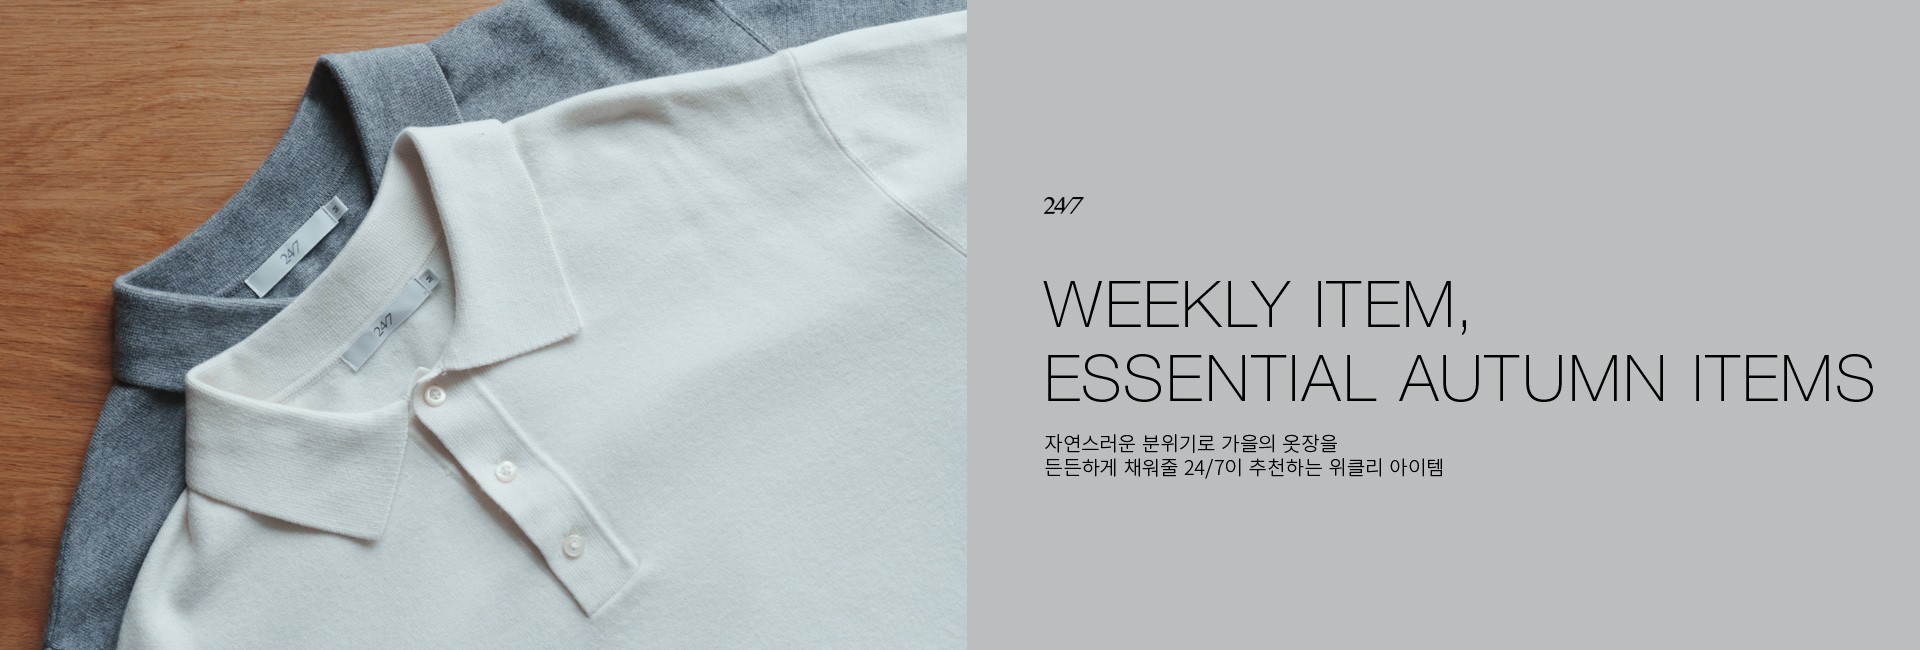 TS_WEEKLY ITEM, ESSENTIAL AUTUMN ITEMS_PC